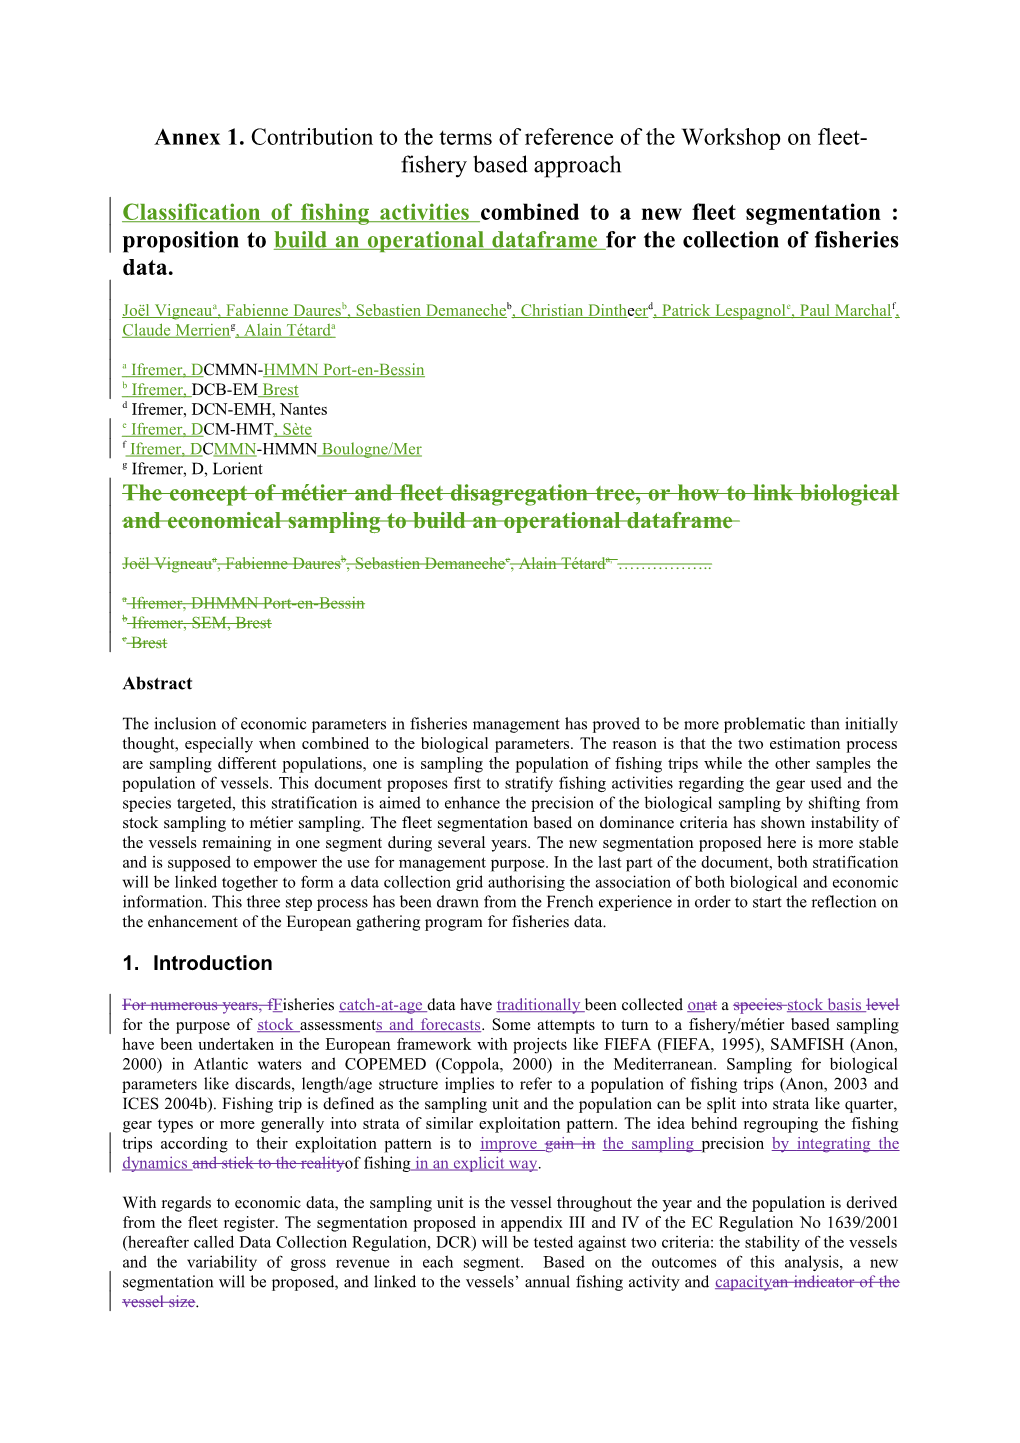 Annex 1. Contribution to the Terms of Reference of the Workshop on Fleet-Fishery Based Approach